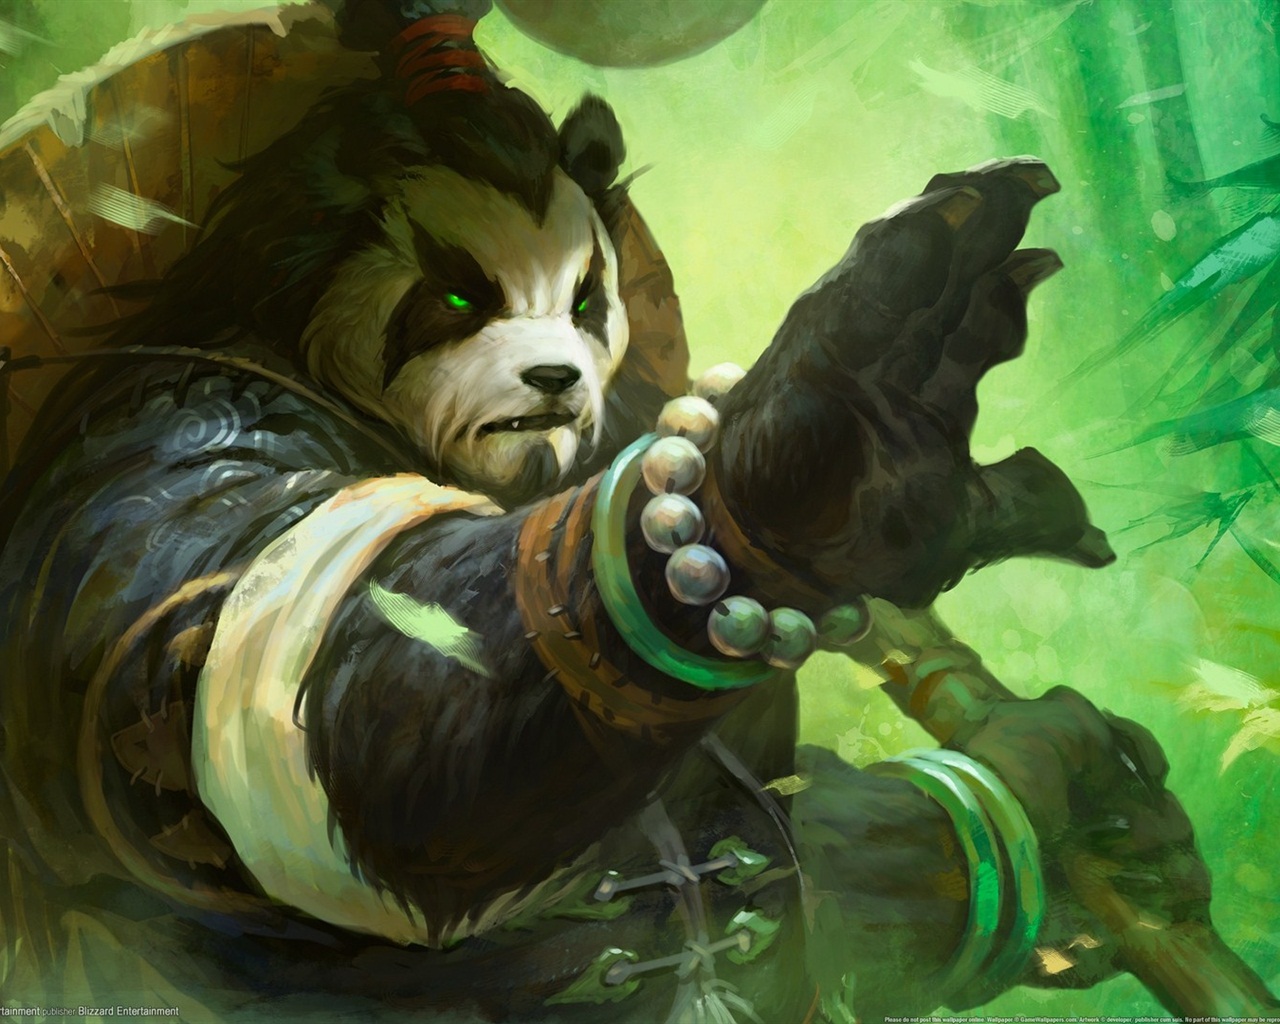 World of Warcraft: Mists of Pandaria HD wallpapers #11 - 1280x1024